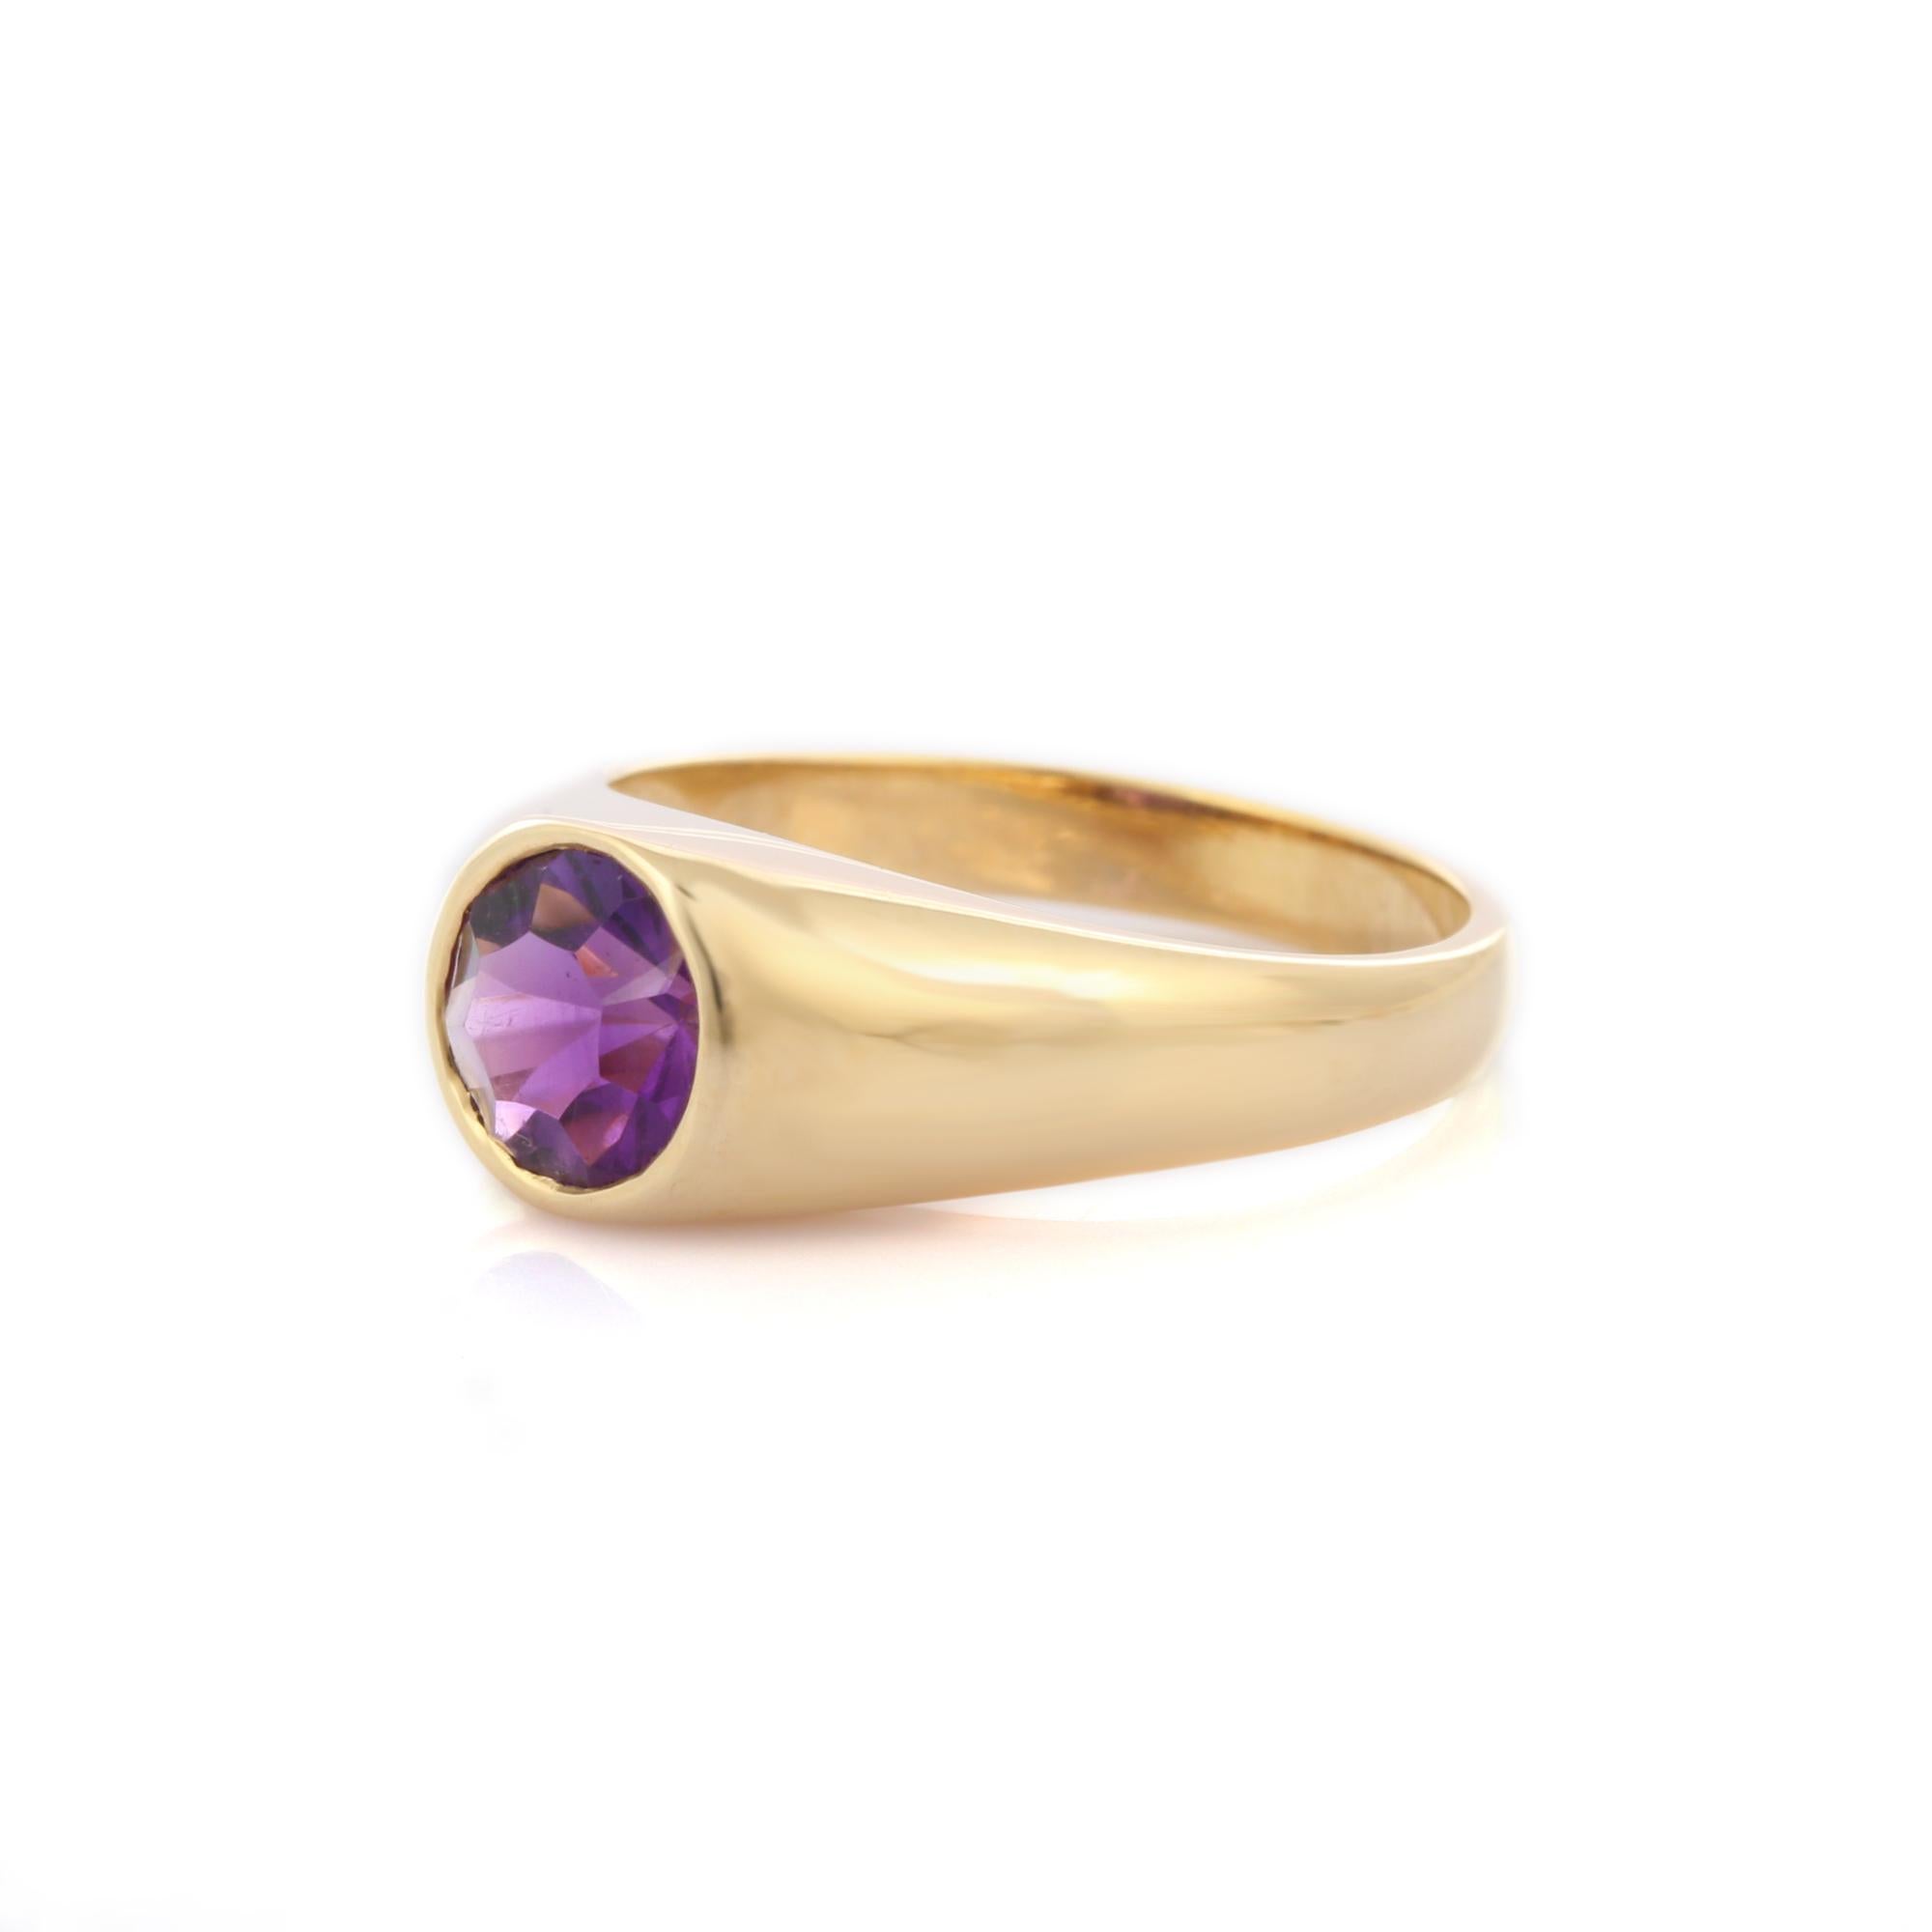 For Sale:  Unisex 14 Karat Yellow Gold Round Cut Amethyst Solitaire Ring 3